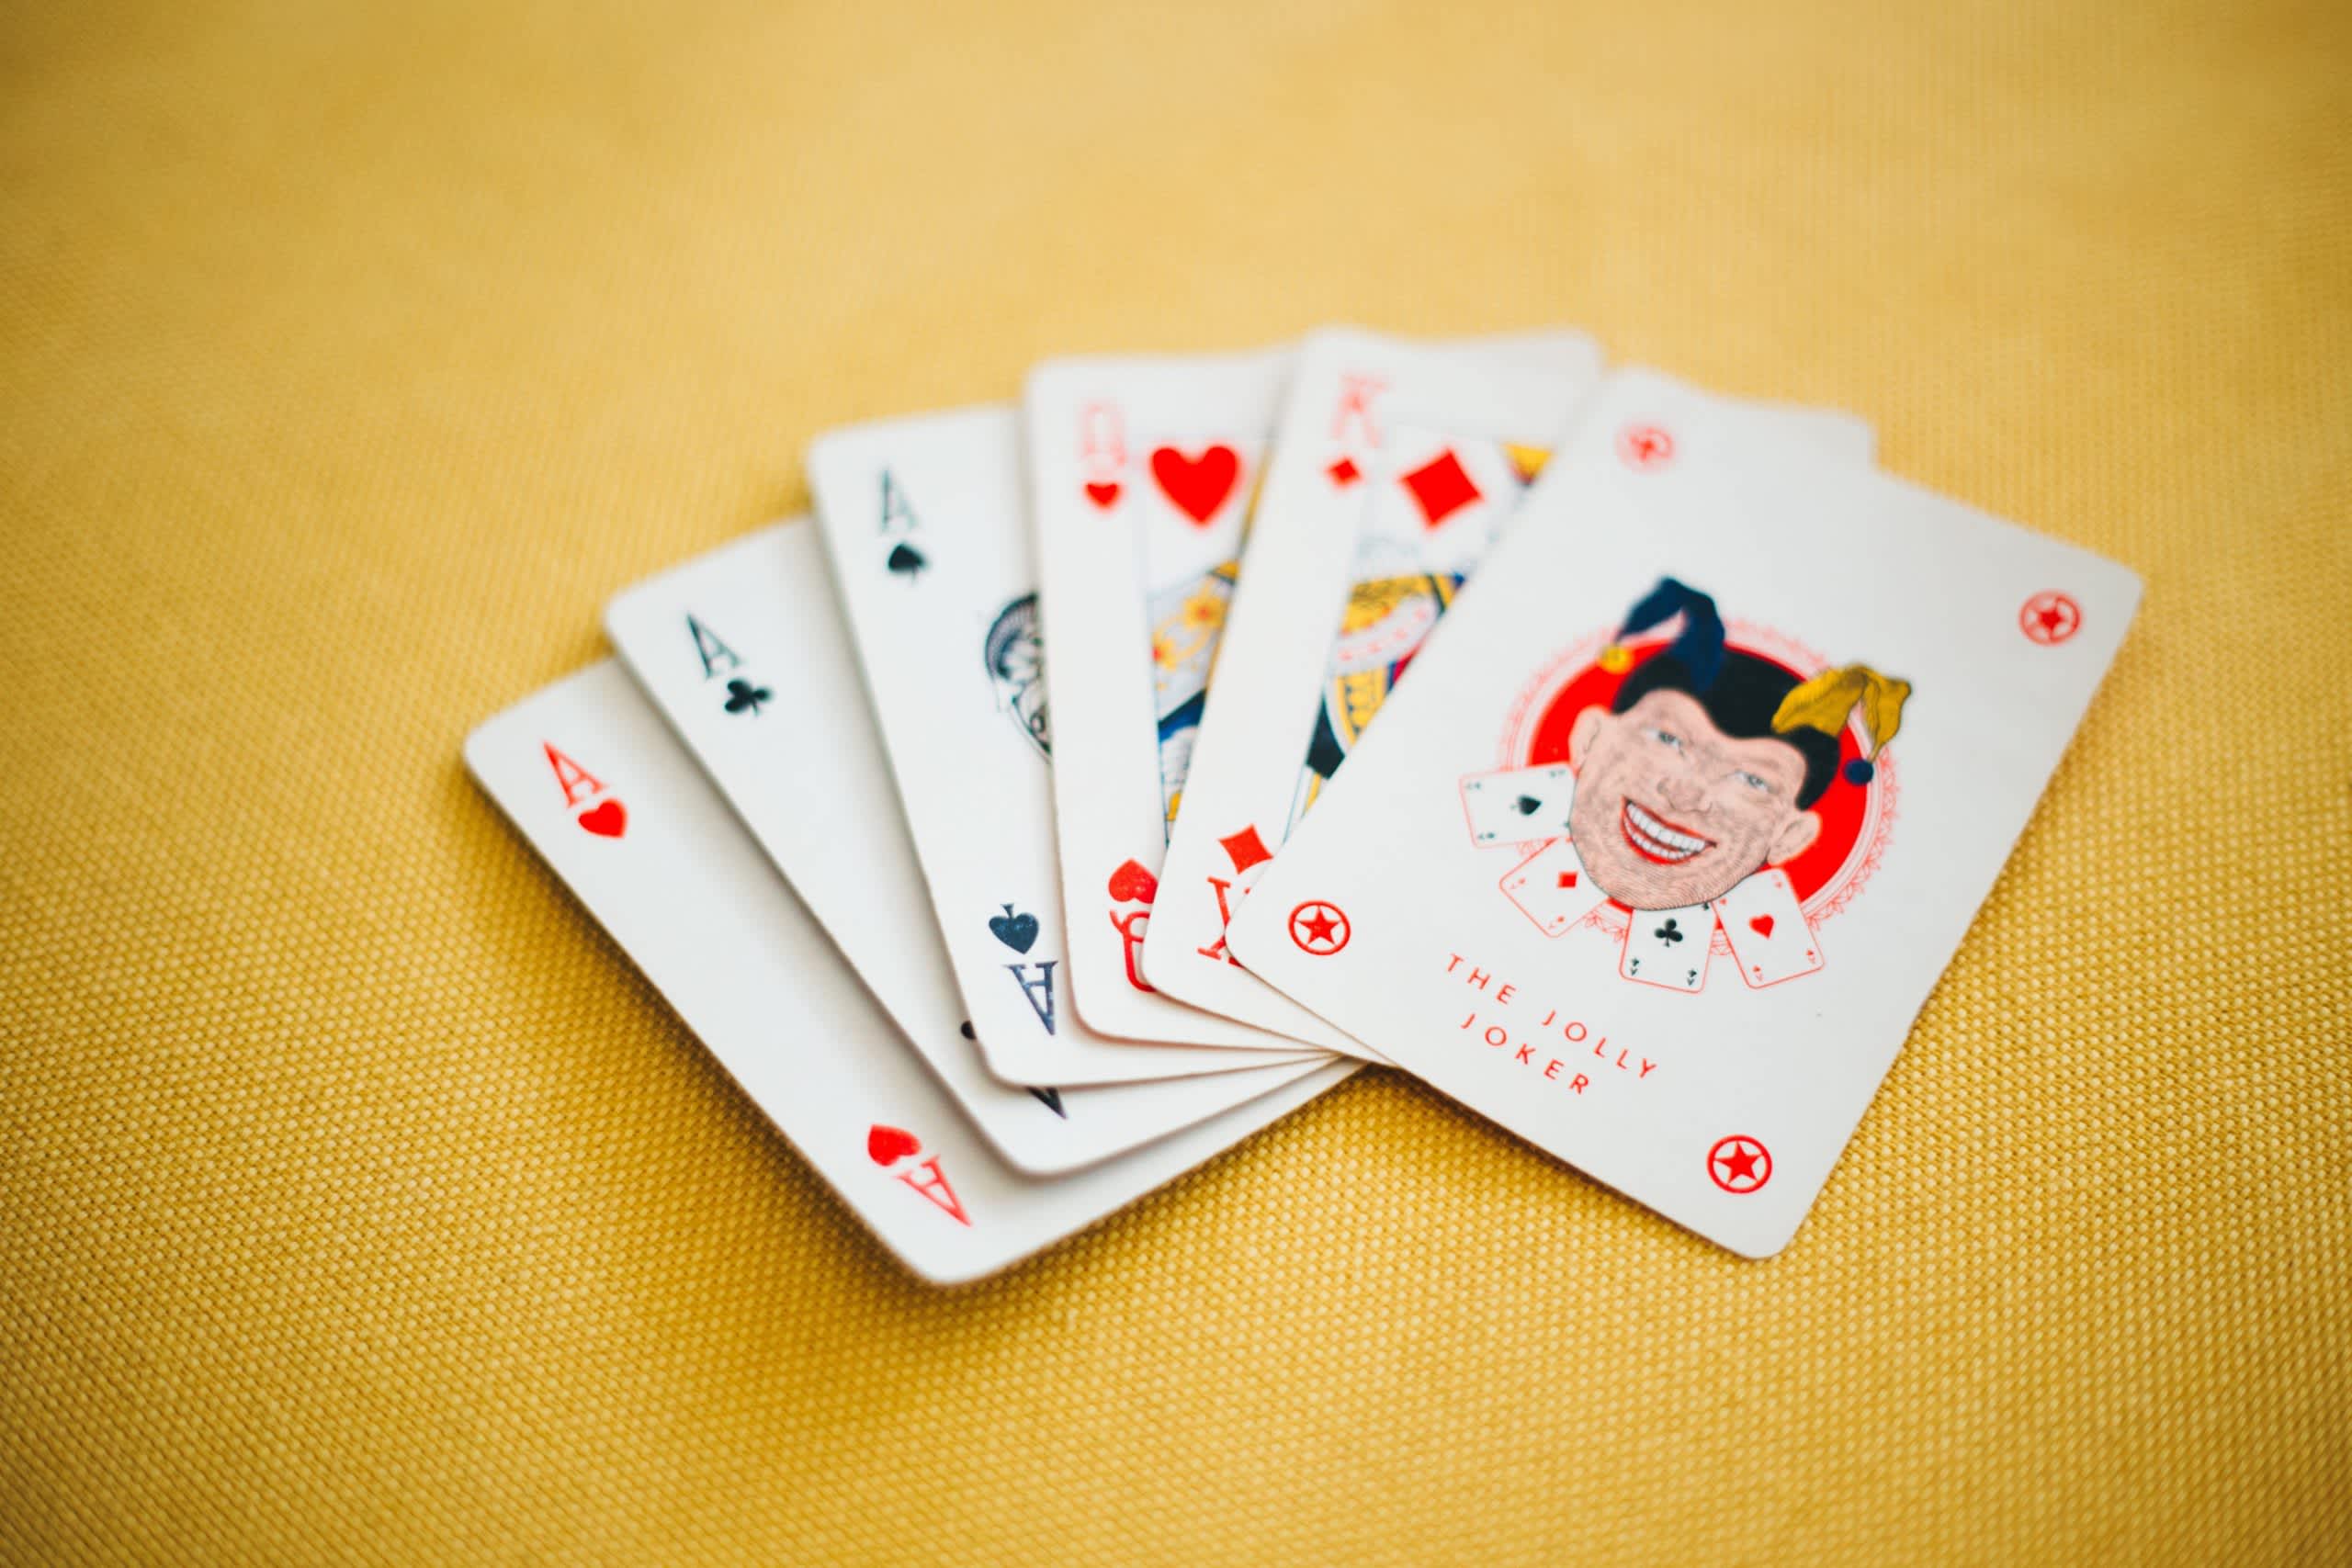 6 playing cards on a yellow background